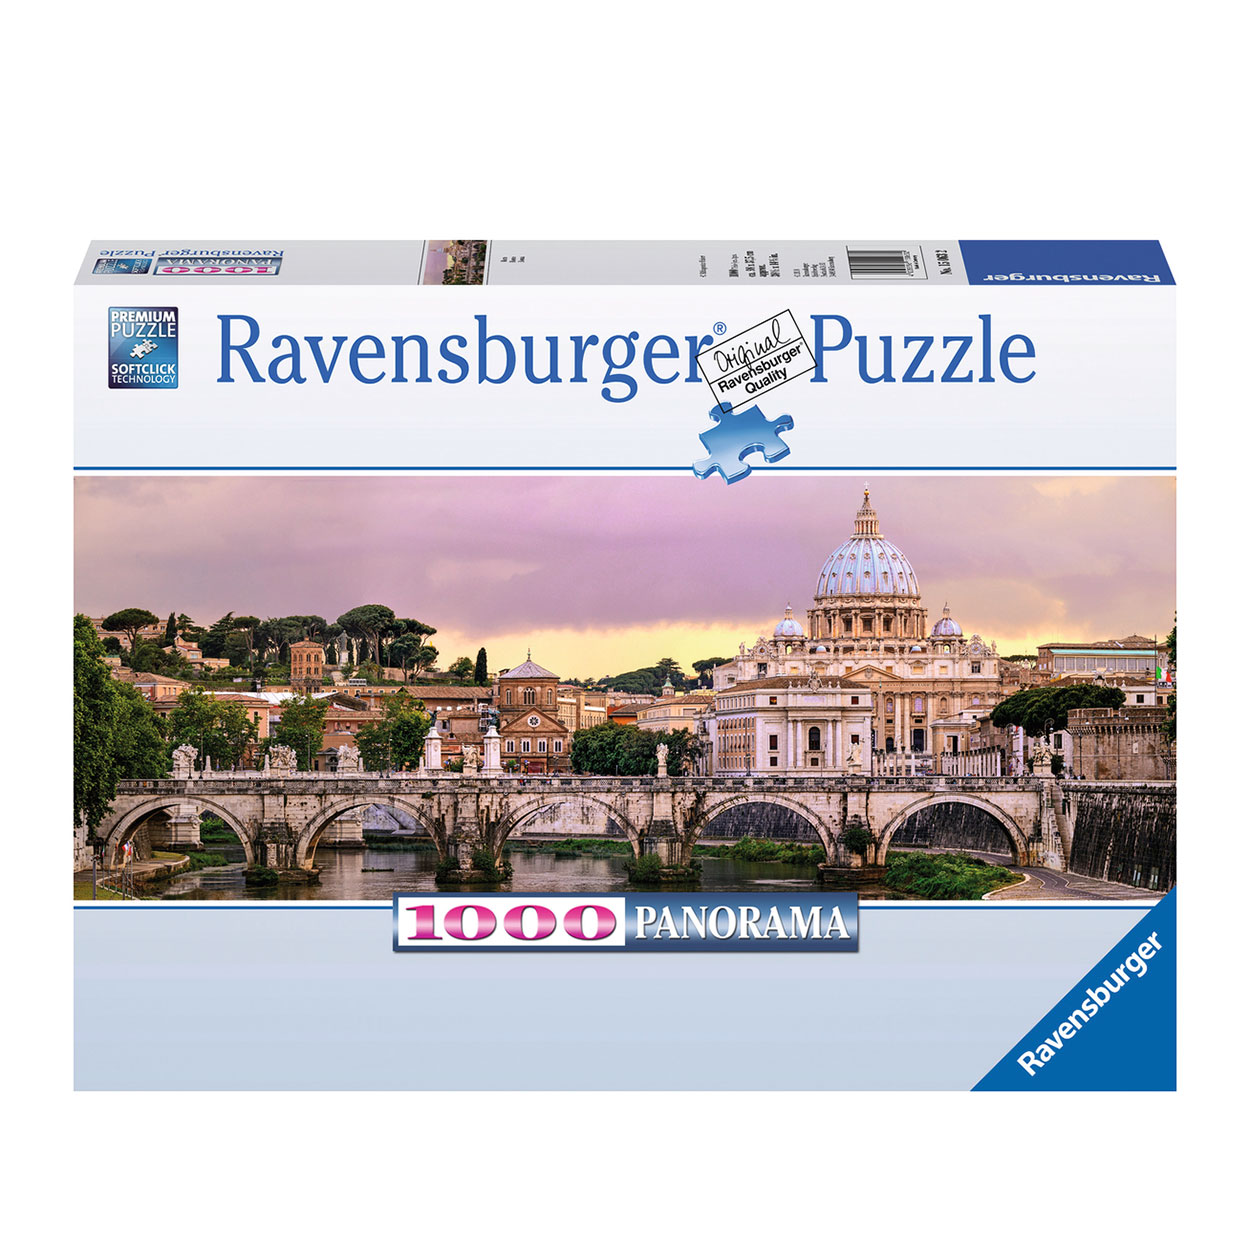 Rome Panorama Puzzel, 1000st.